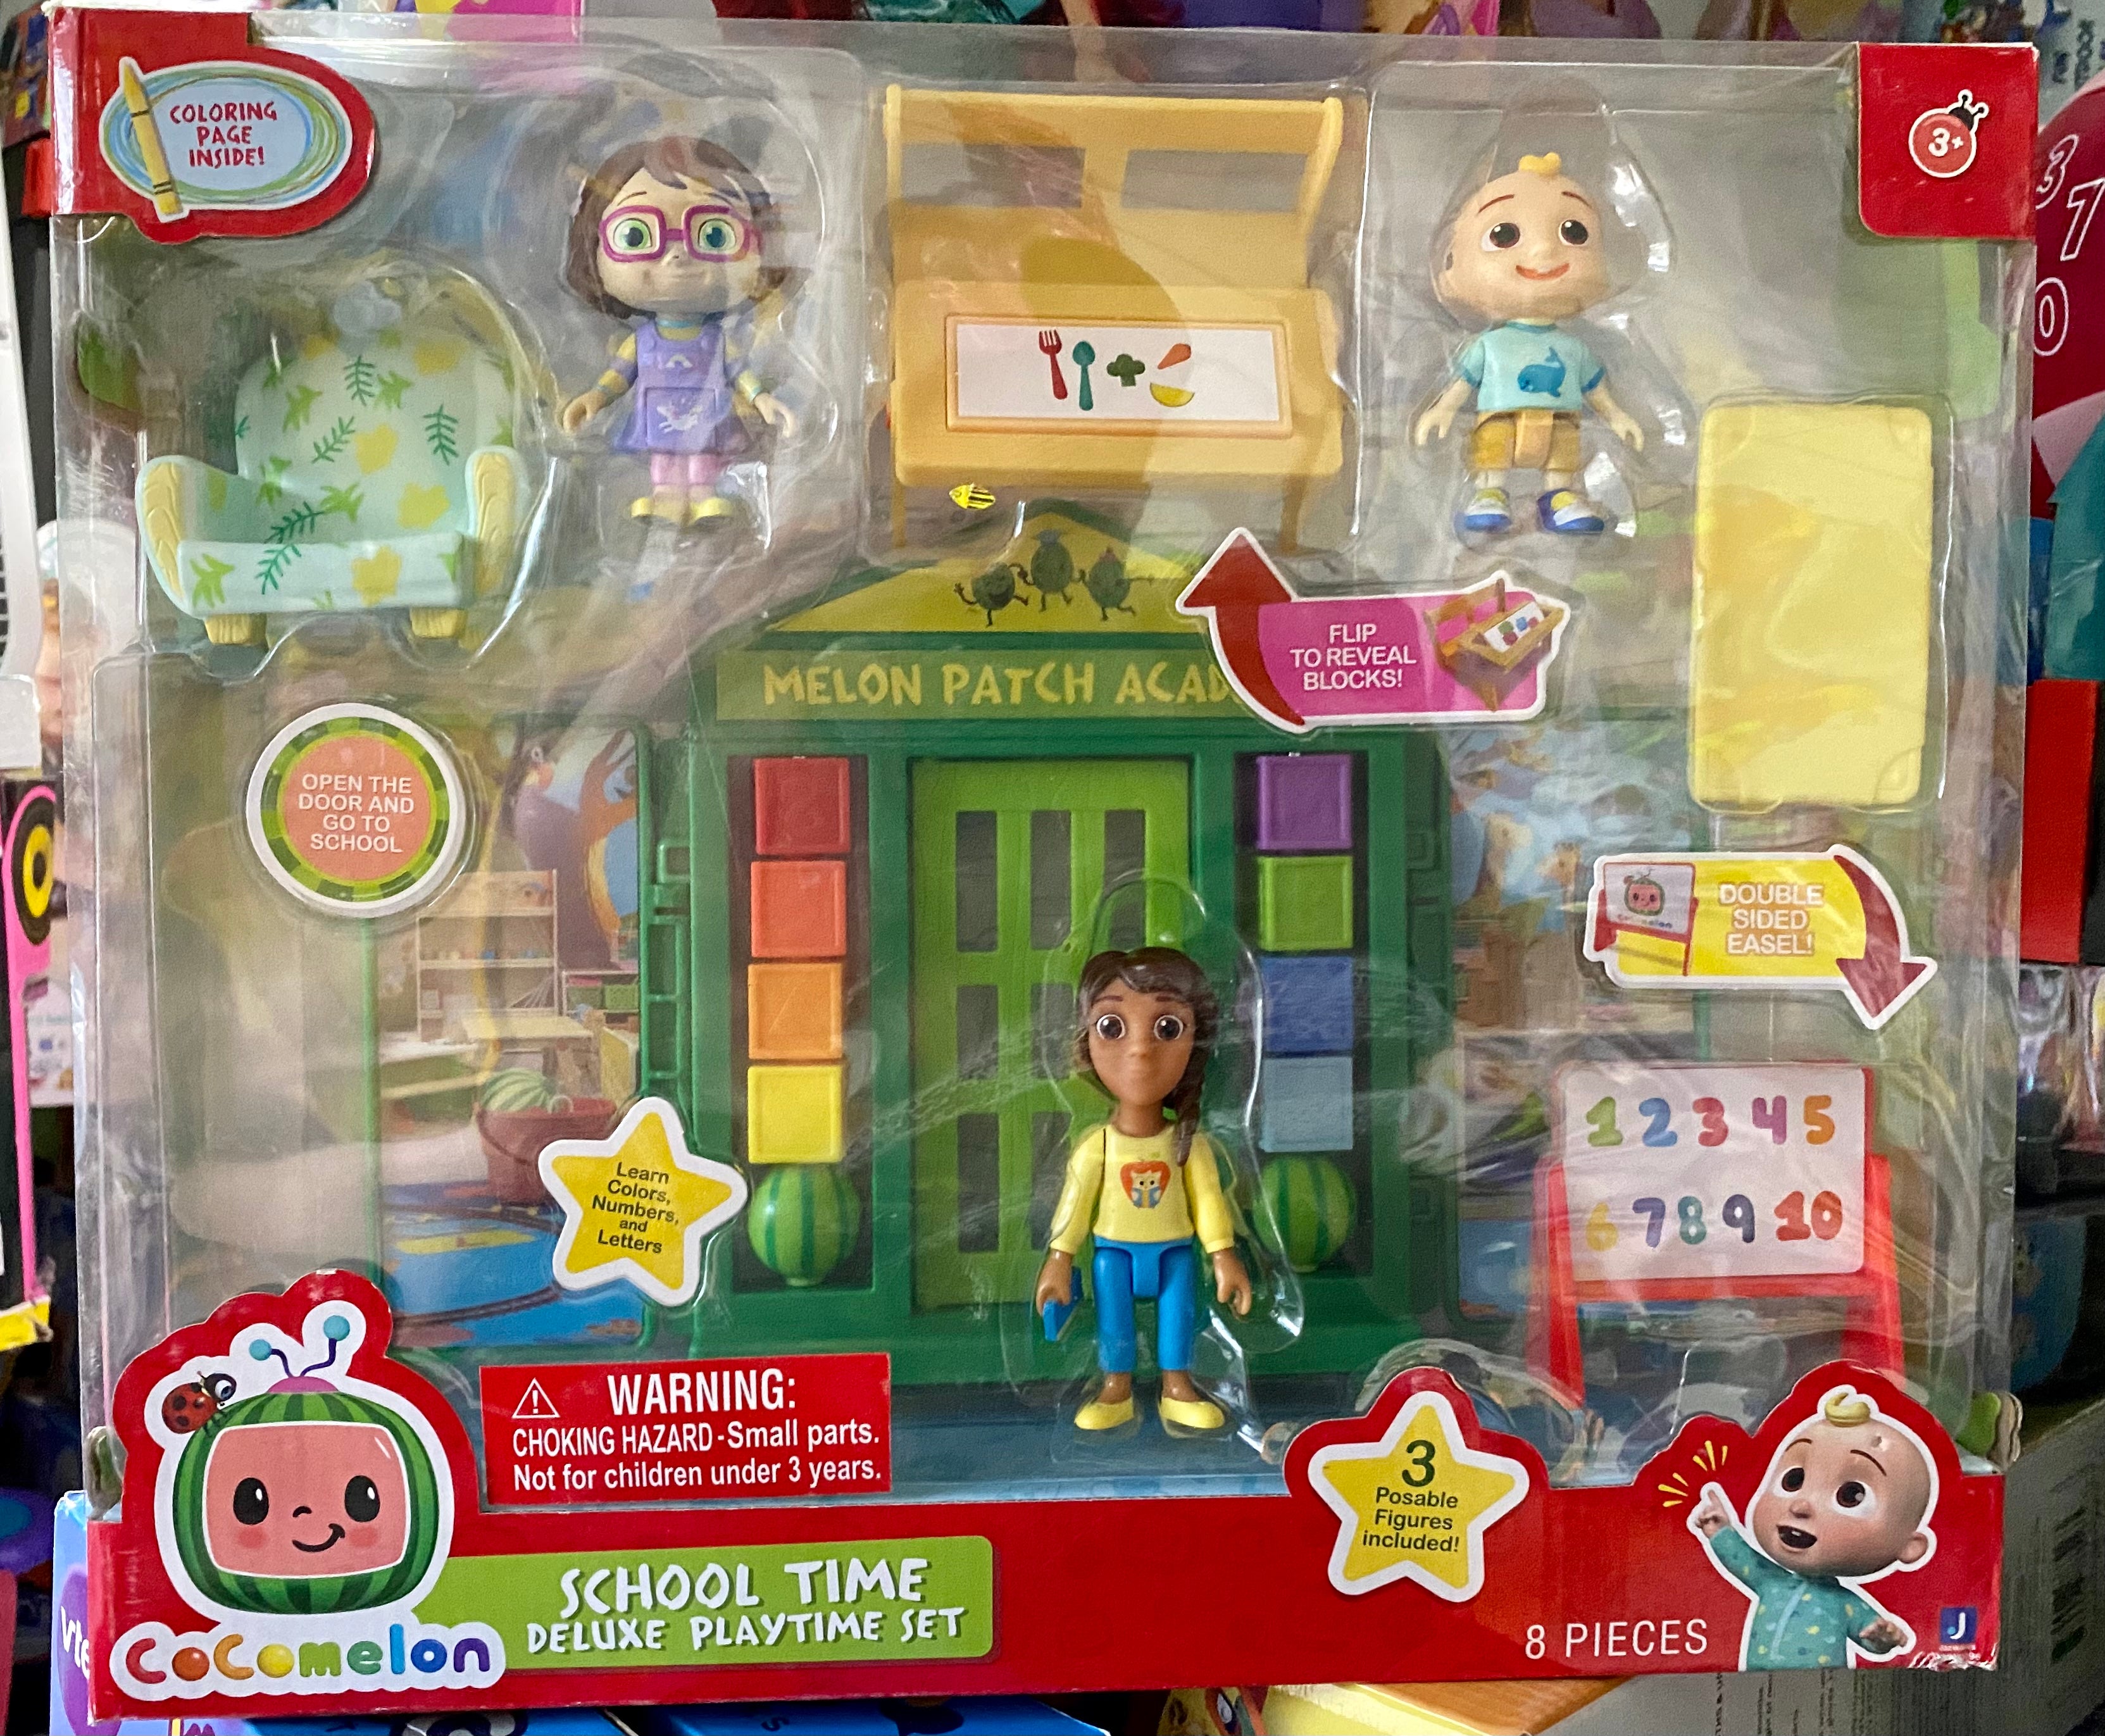 CoComelon School Time Deluxe Playtime Set - JJ, Bella, Ms